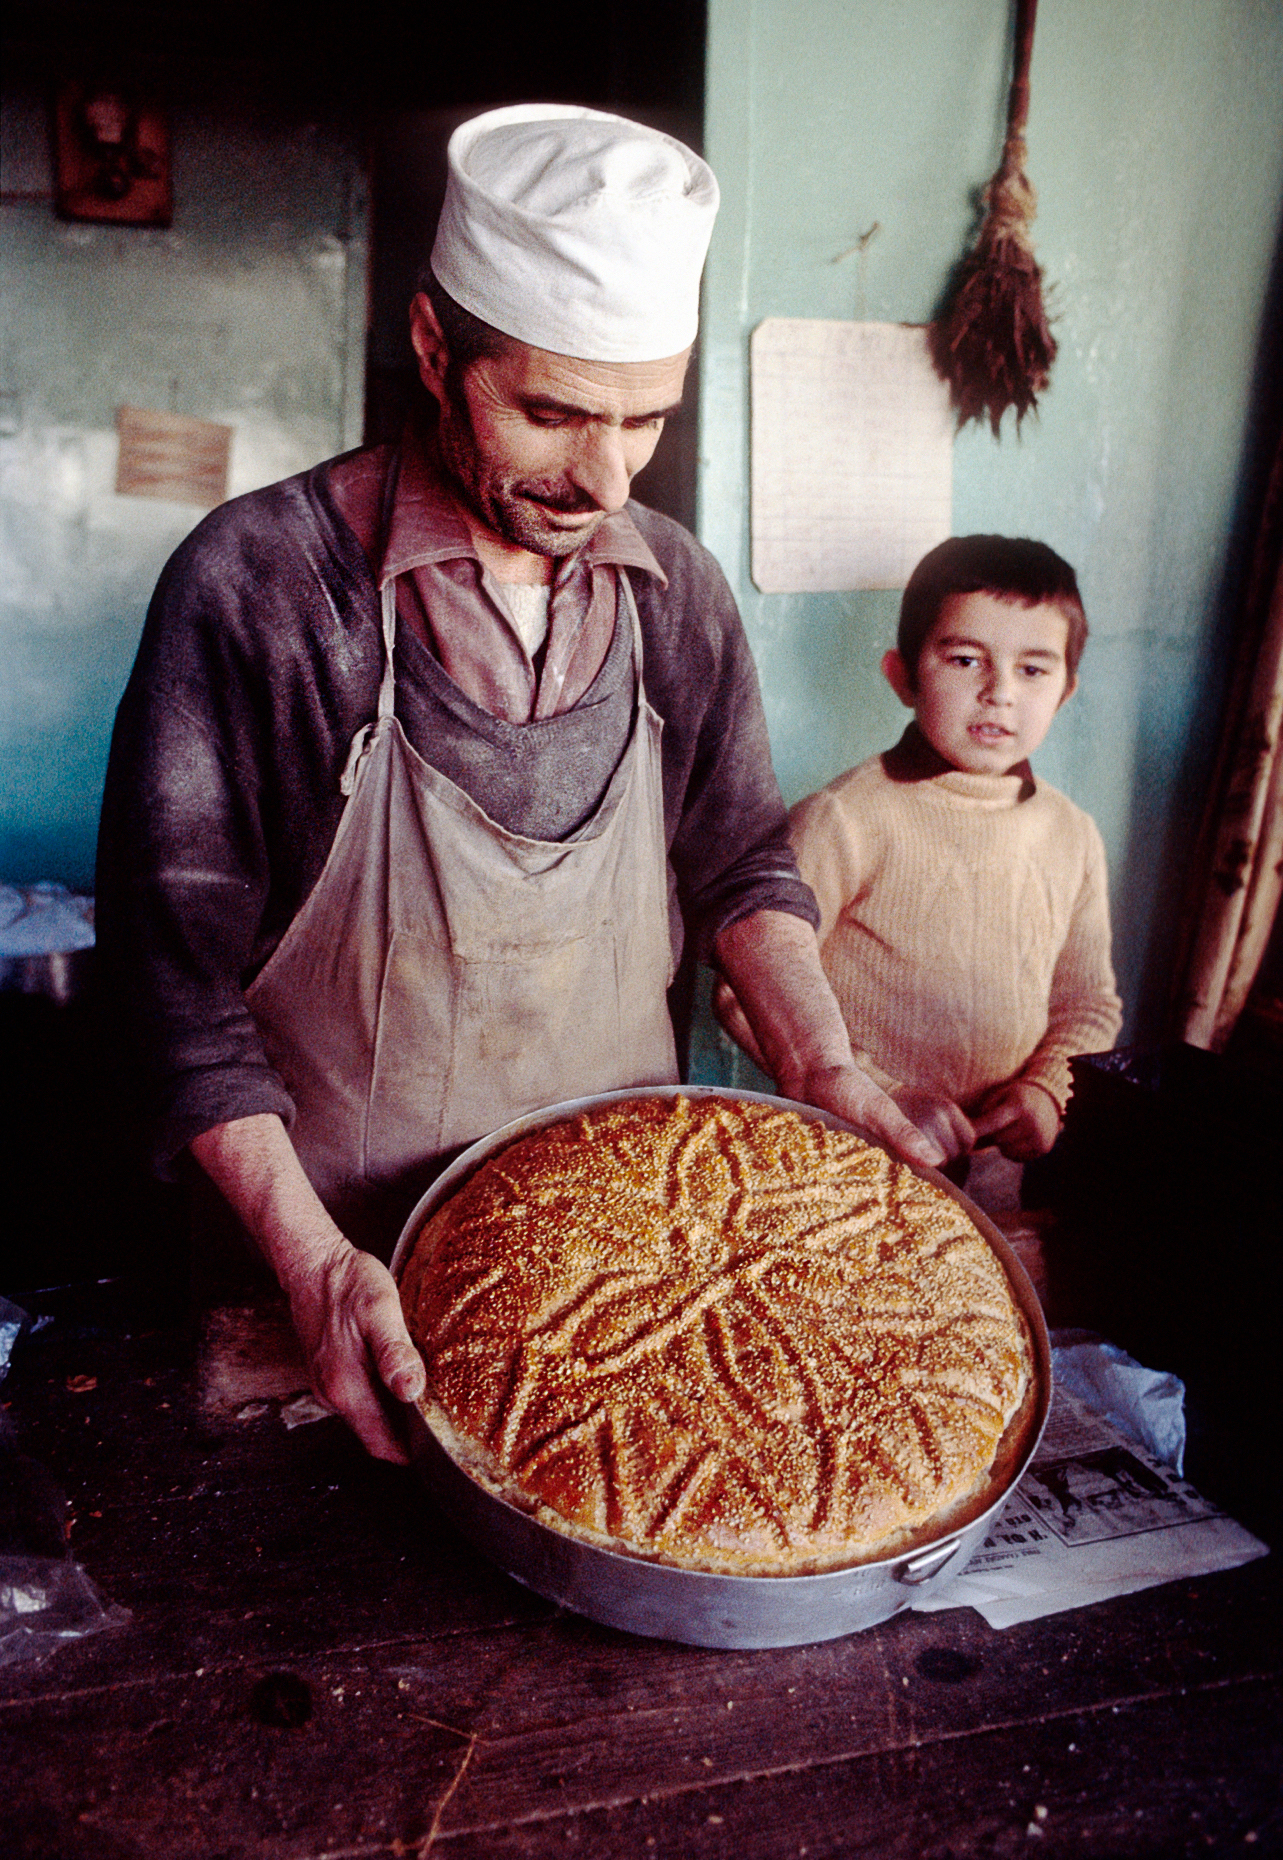 Local Greek baker and son show a freshly baked Christmas bread in the small northern mountain town of Metsovo, Greece